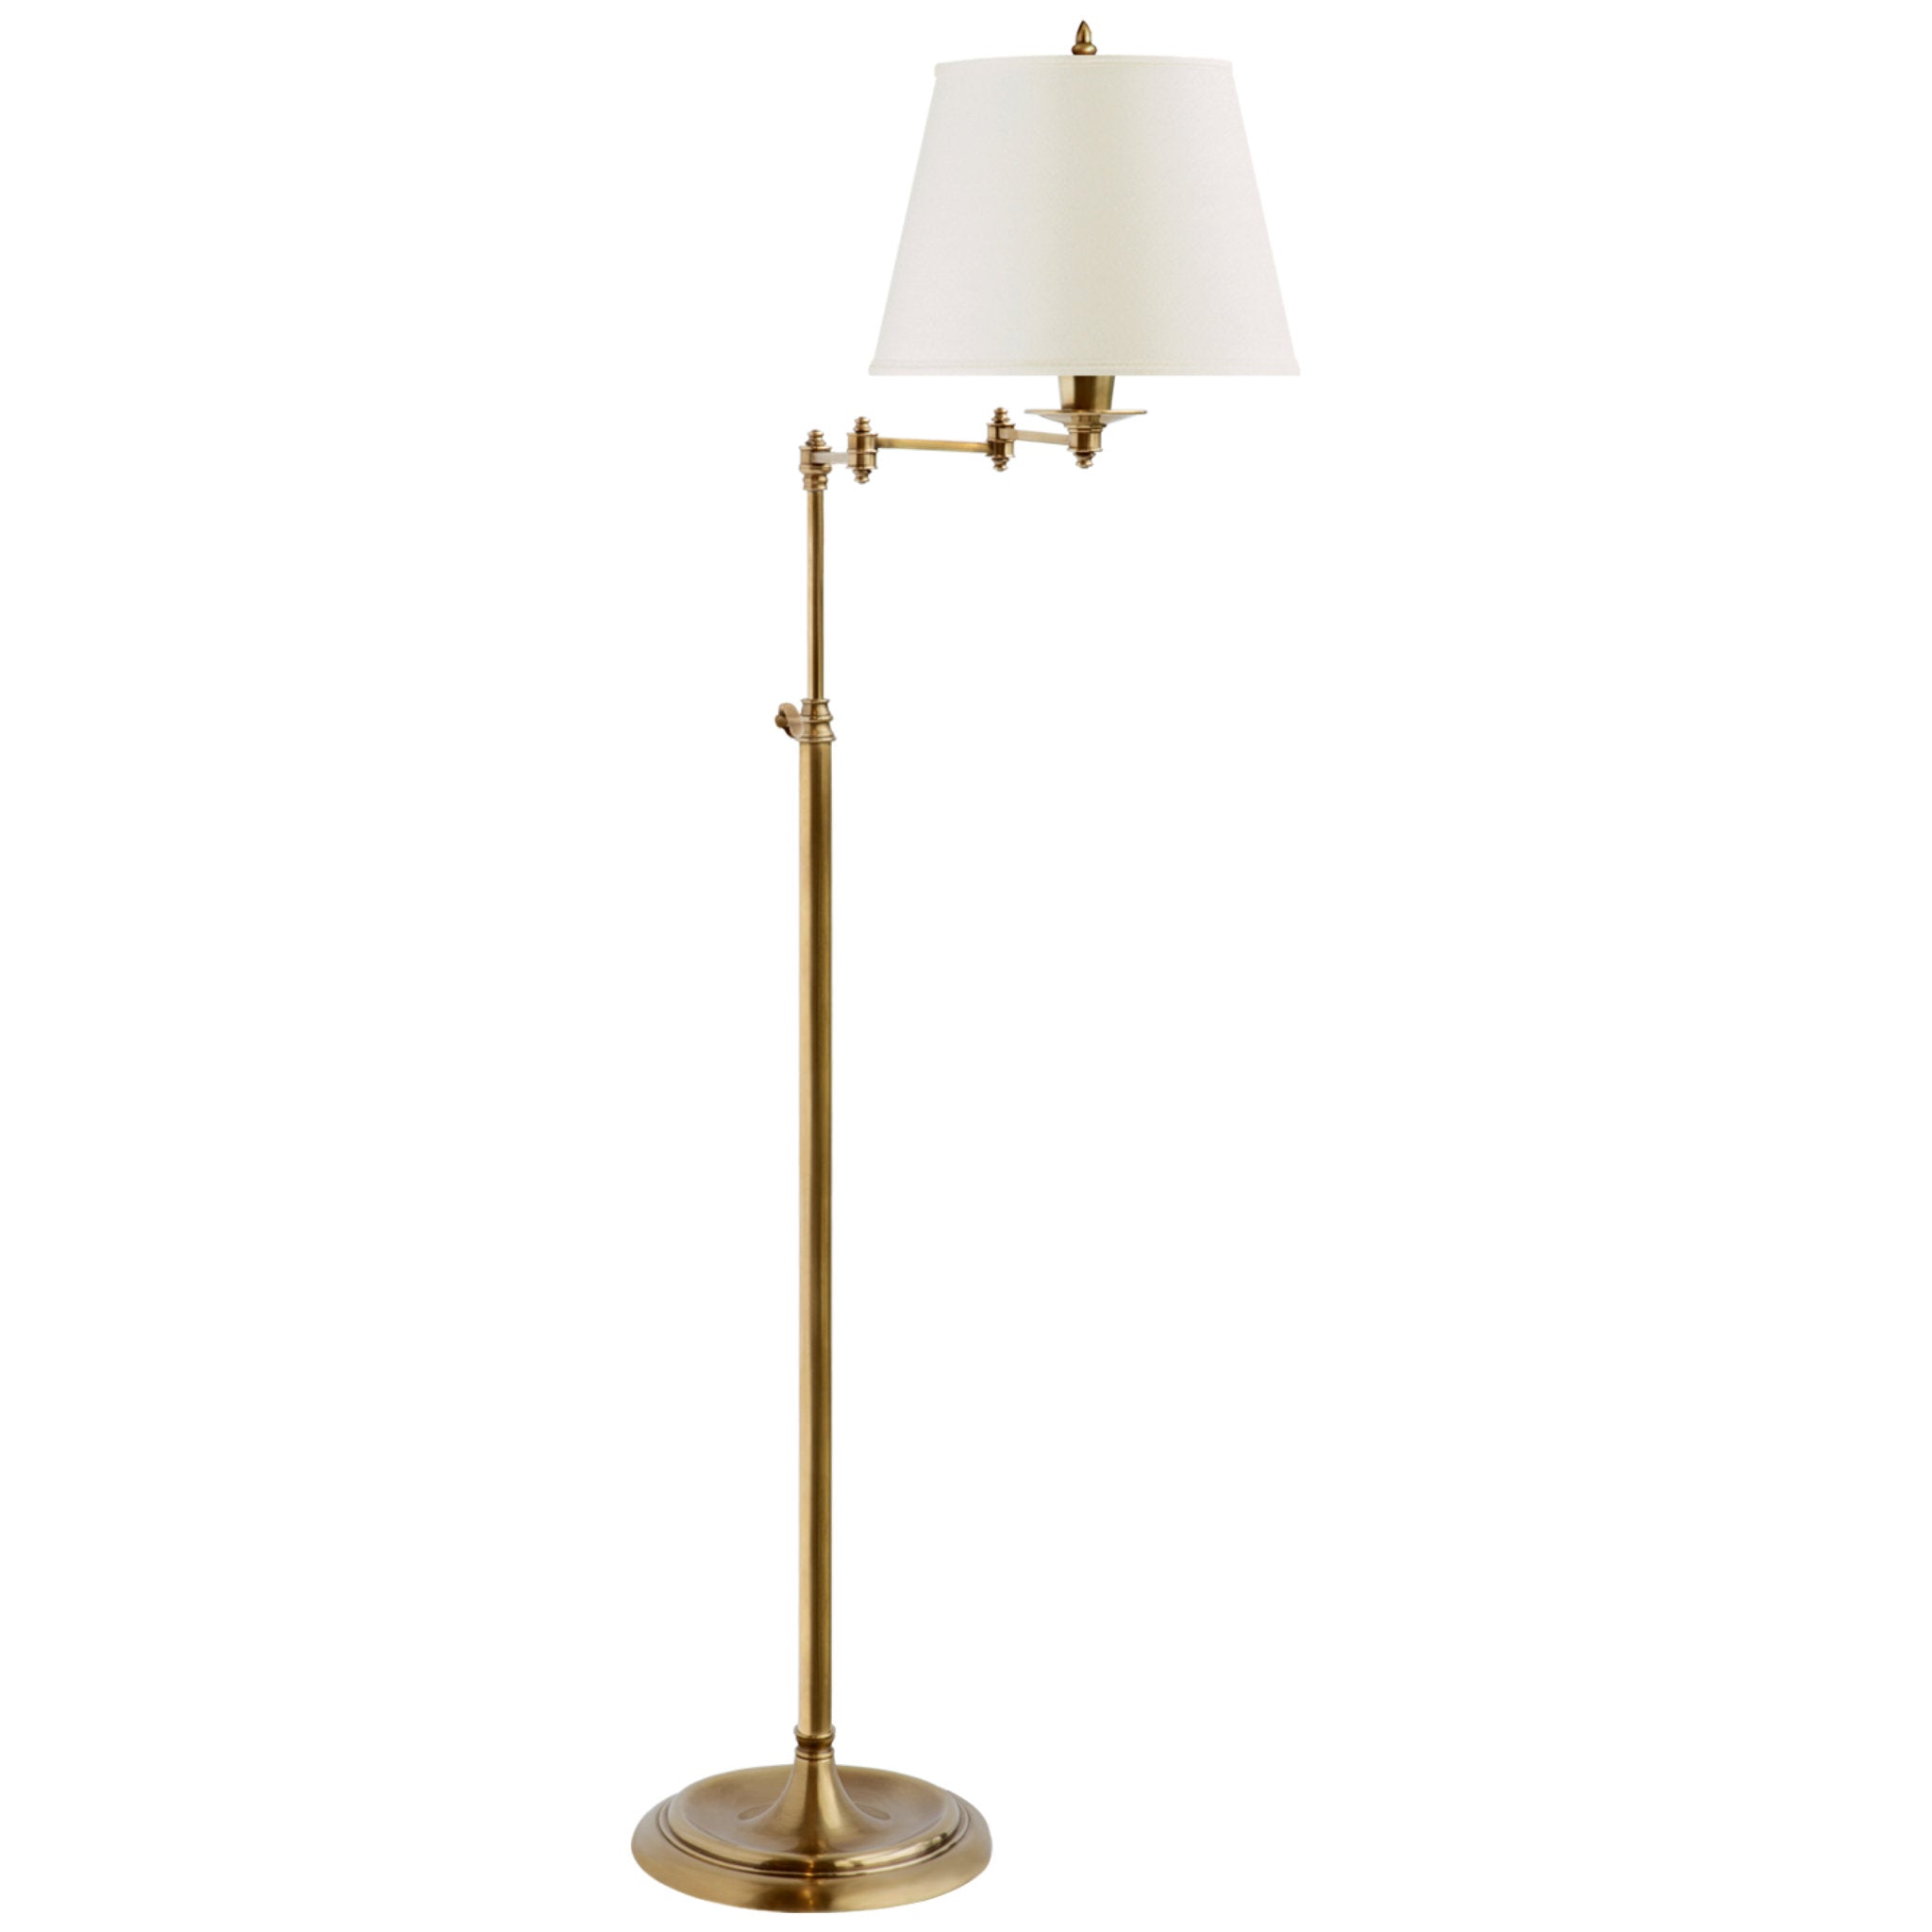 Visual Comfort Triple Swing Arm Floor Lamp in Hand-Rubbed Antique Brass with Linen Shade